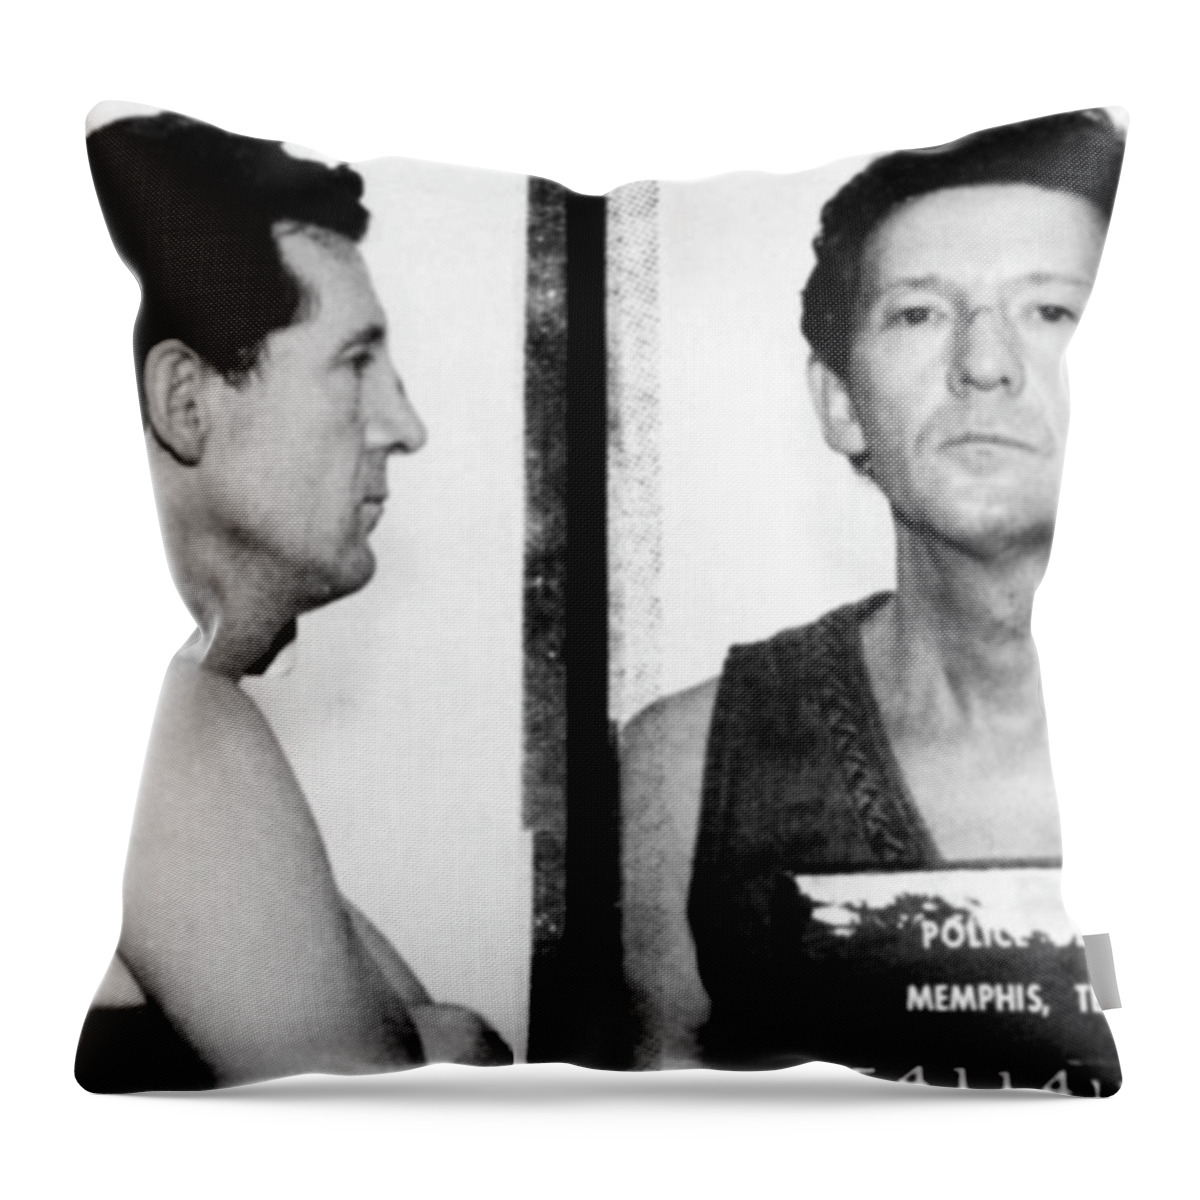 Jerry Lee Lewis Throw Pillow featuring the photograph Jerry Lee Lewis Mug Shot Horizontal by Tony Rubino